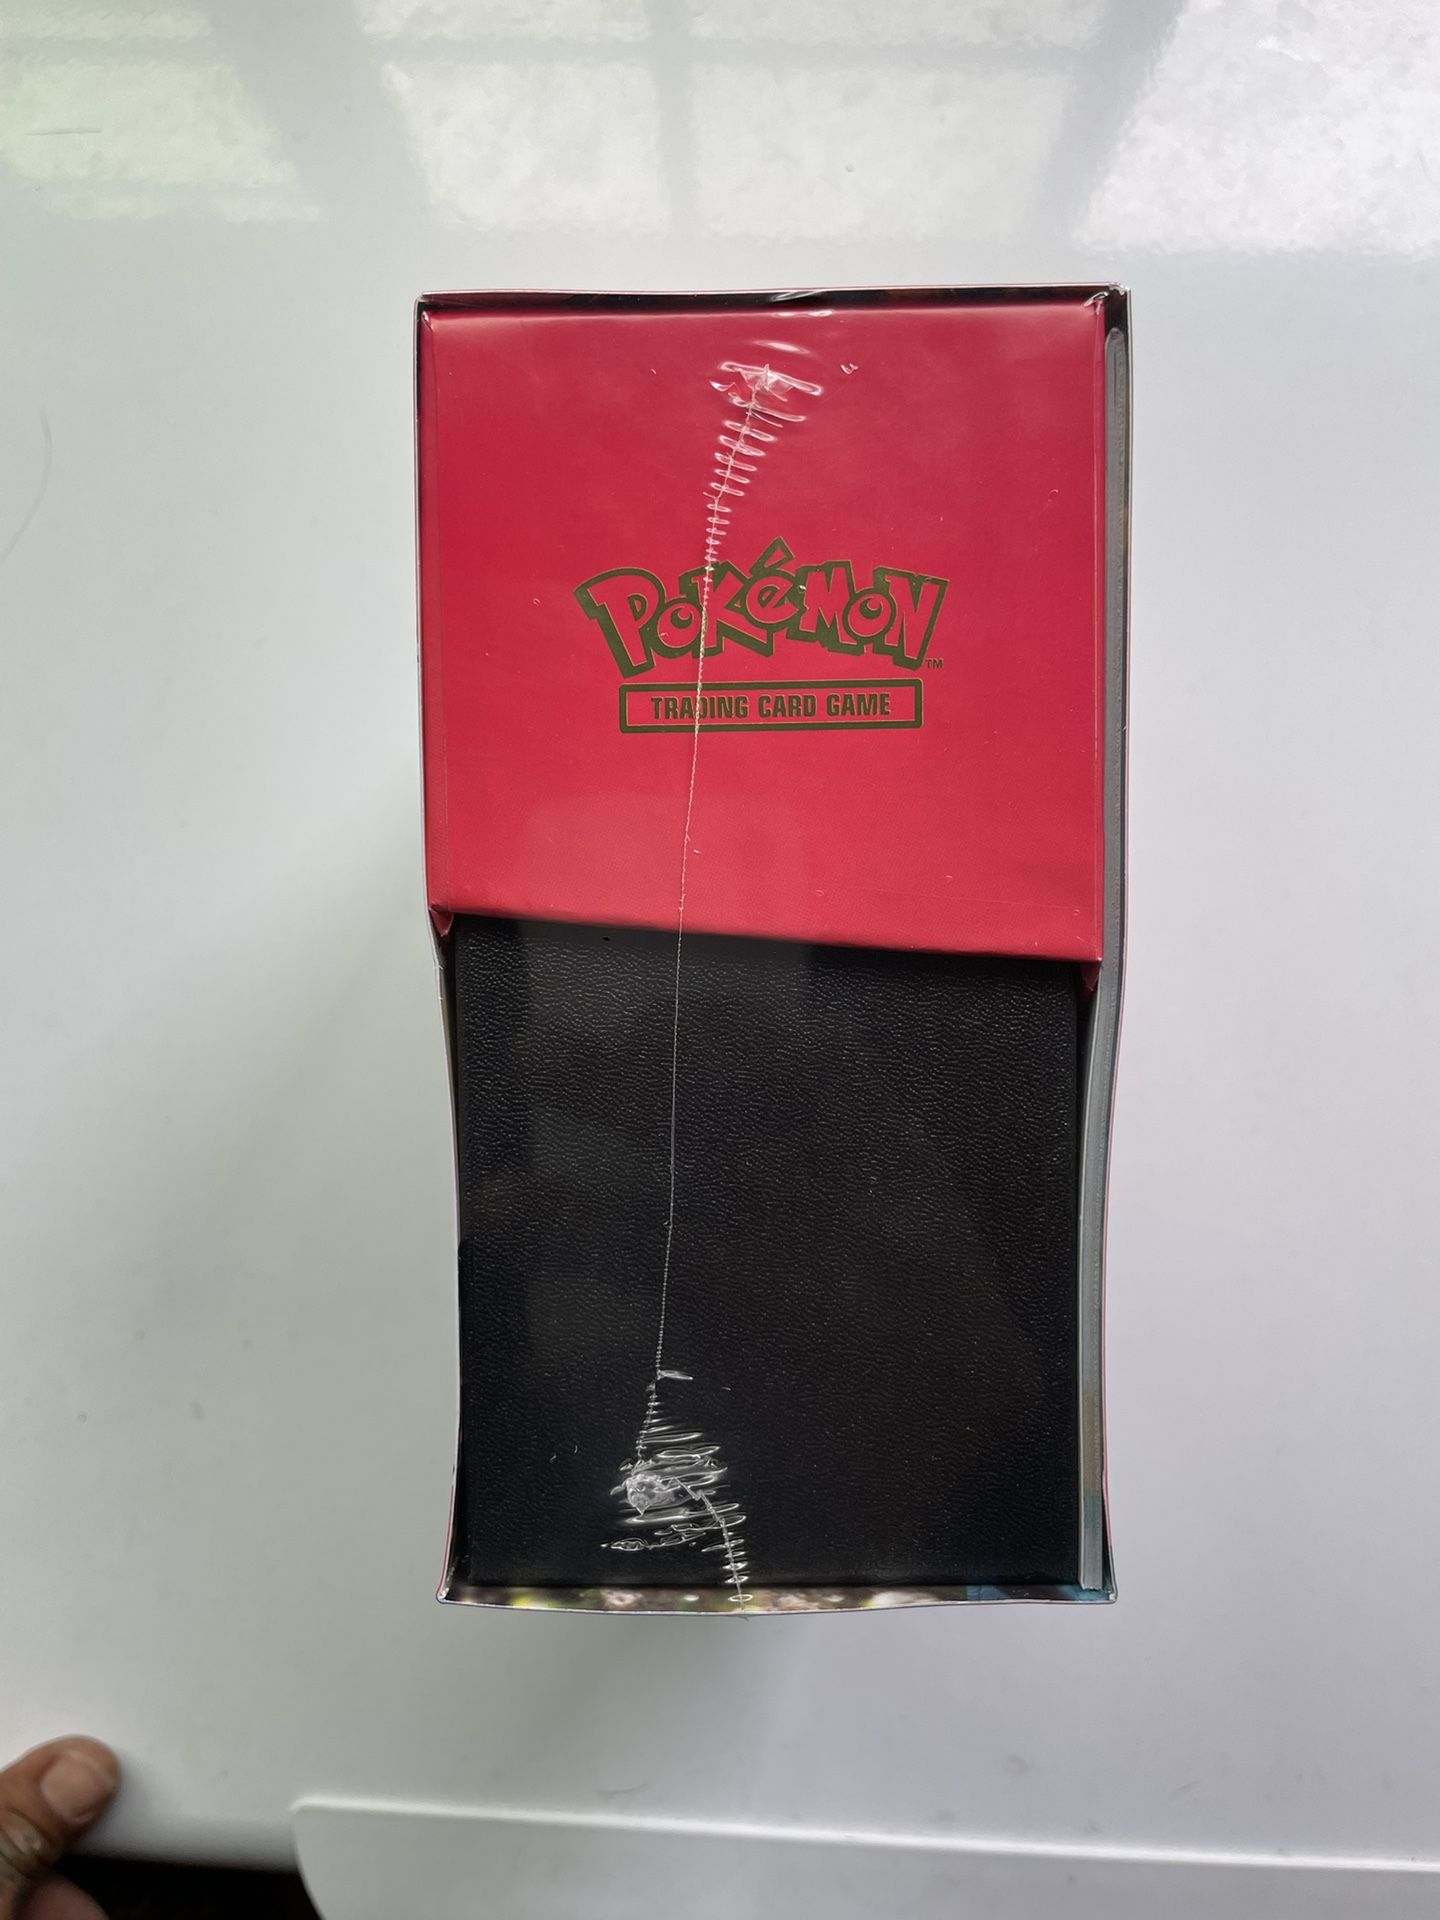 Pokemon Kingambit Illustration Rare 220/198 NM Scarlet And Violet for Sale  in Chula Vista, CA - OfferUp